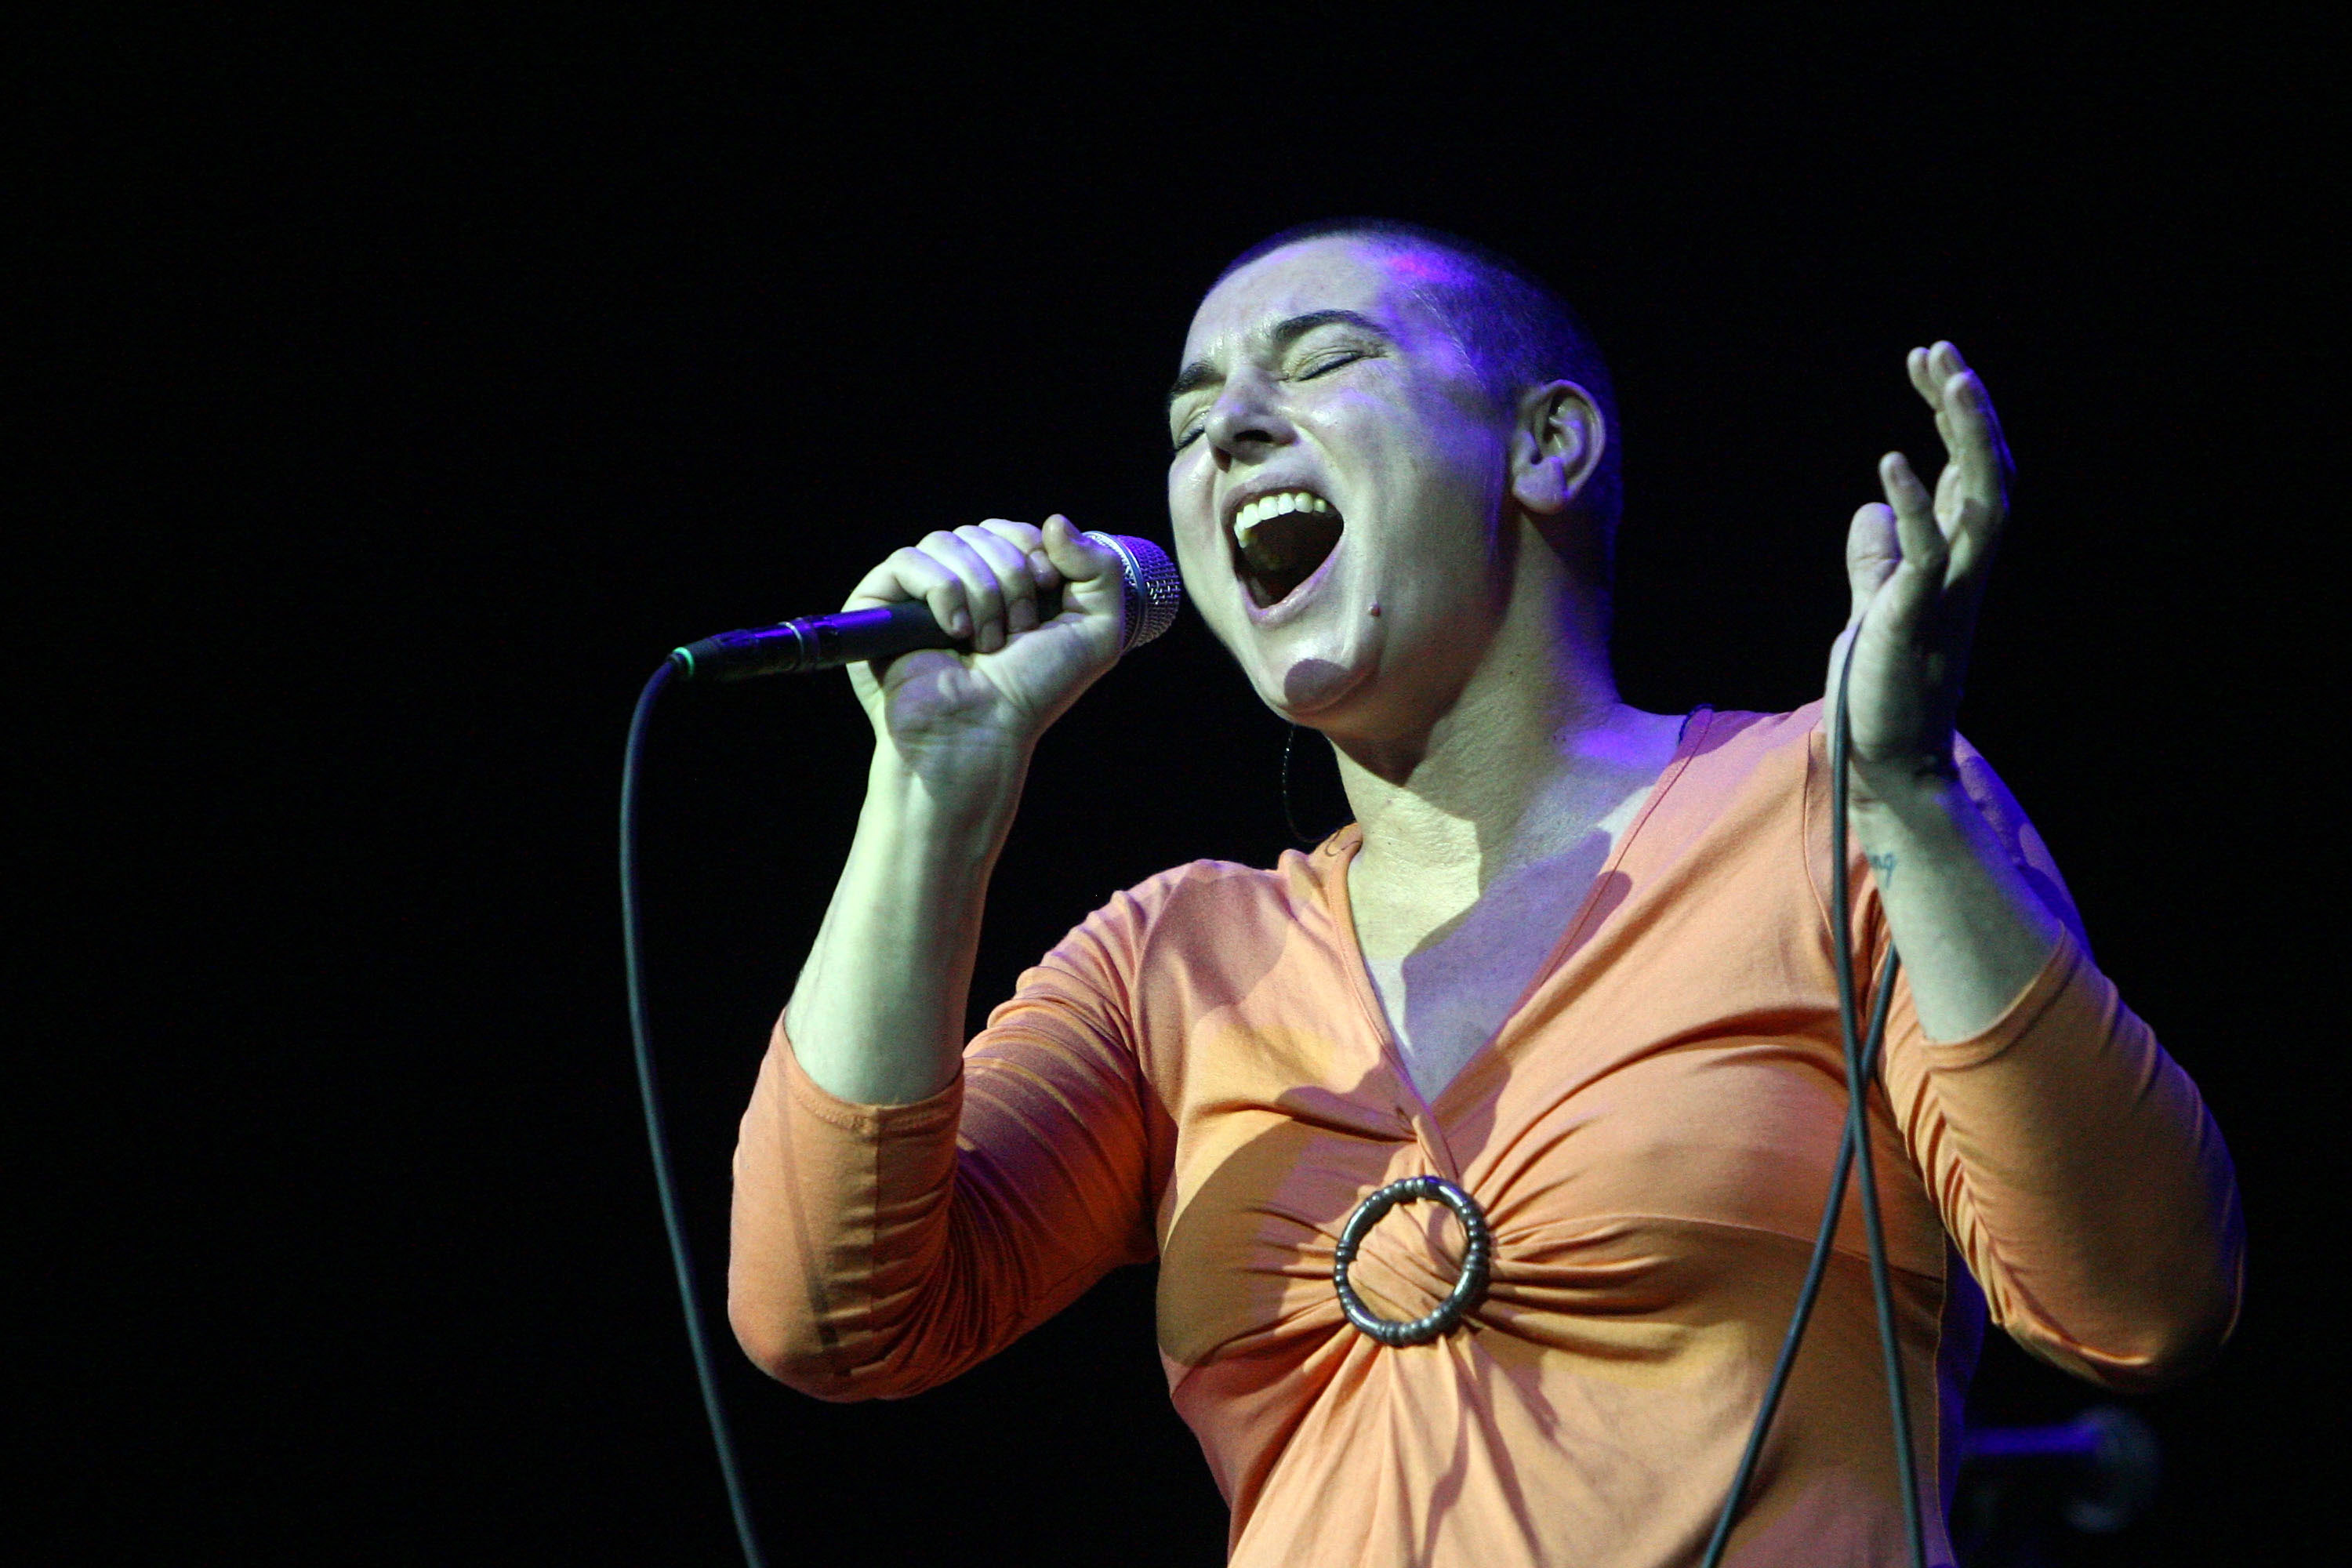 Sinéad O'Connor (Getty Images)